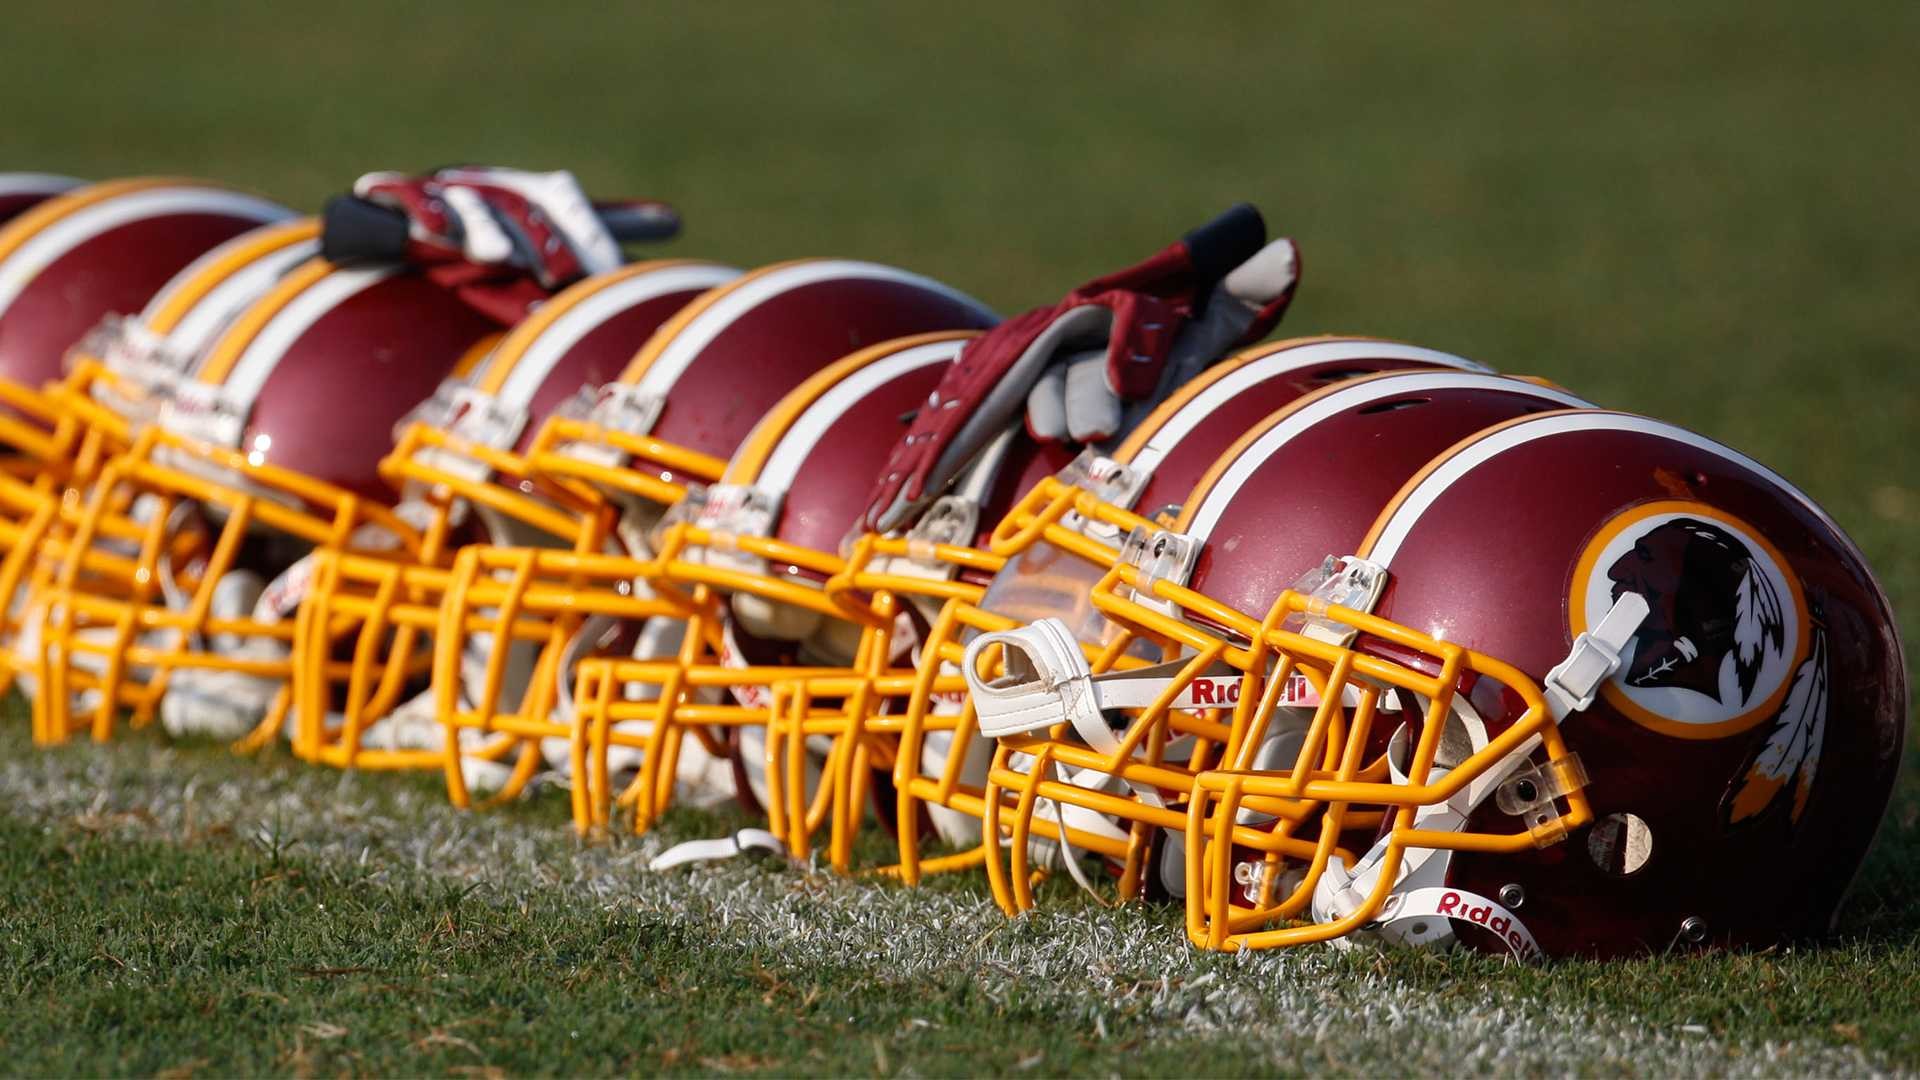 1920x1080 Are the Redskins closer to a name change? - The Washington Post